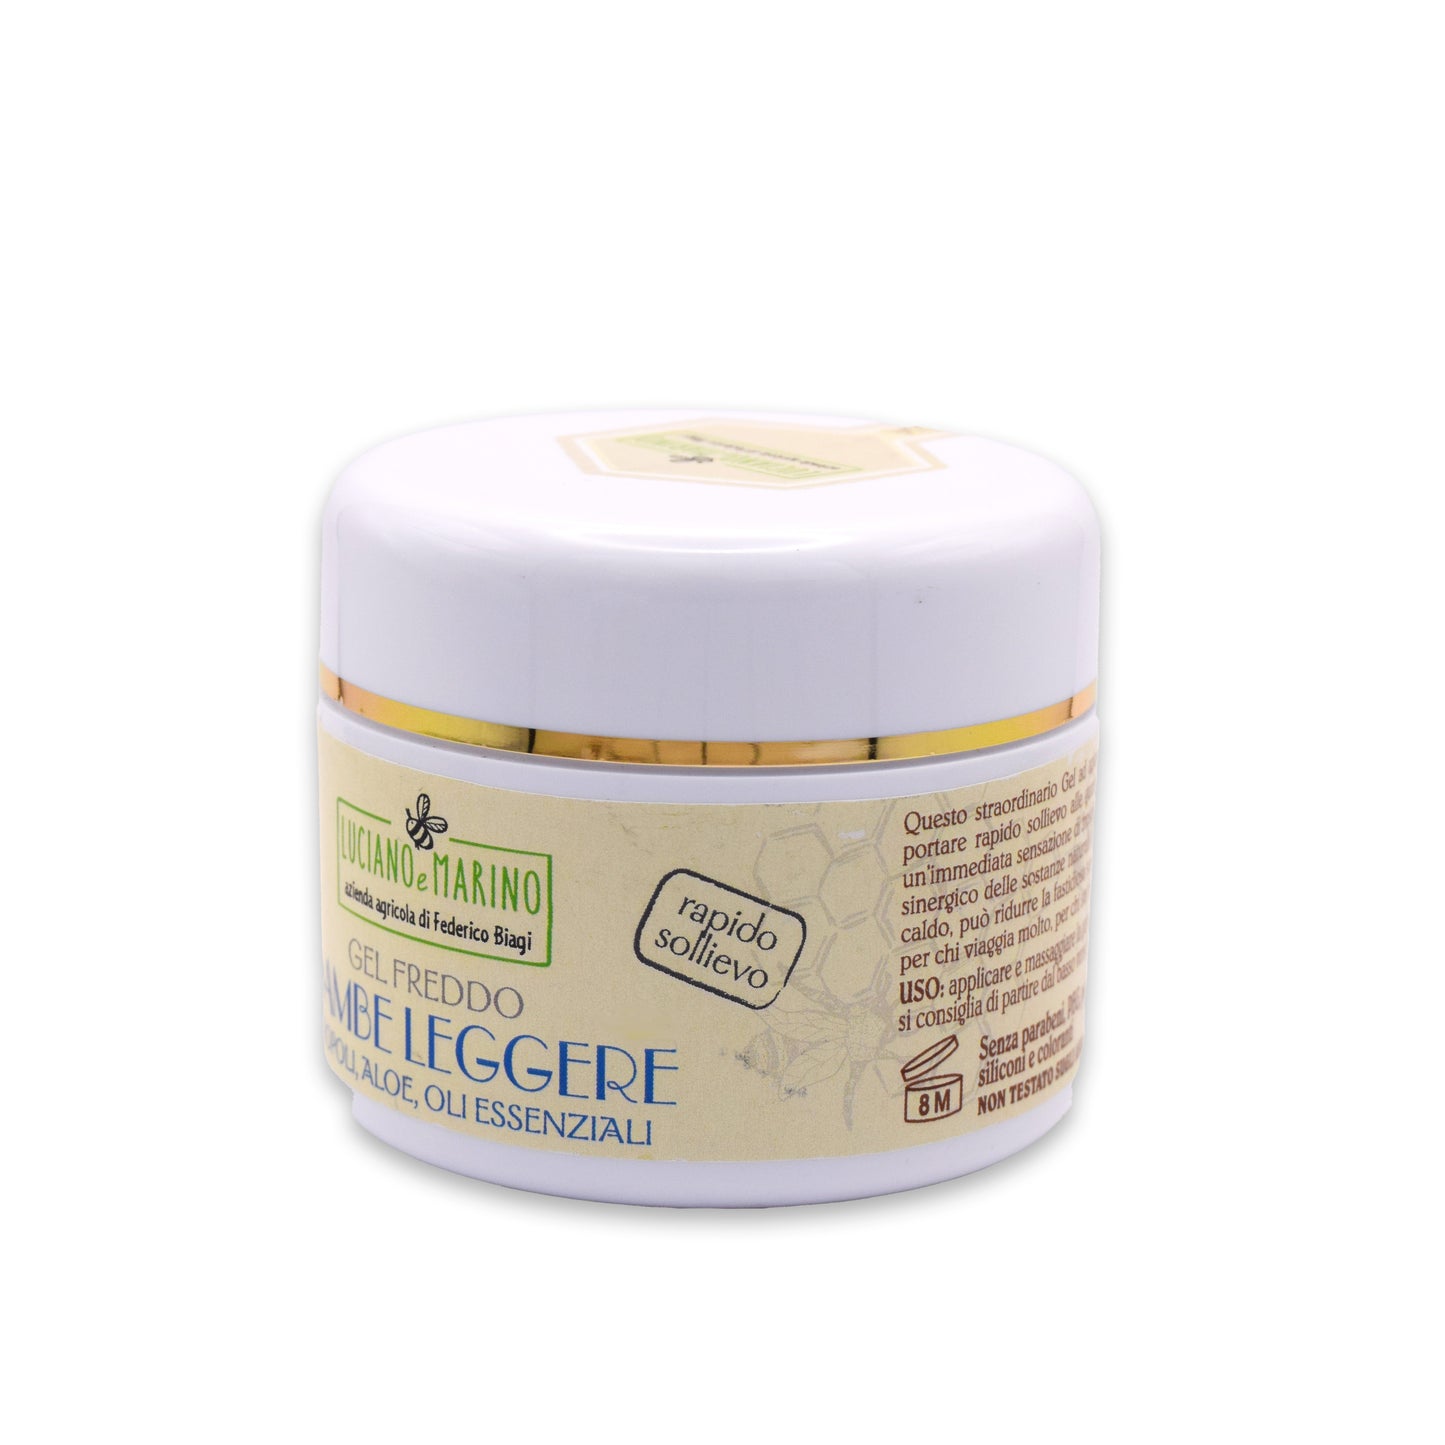 Light Legs Cold Gel with propolis, aloe and essential oils - 100ml